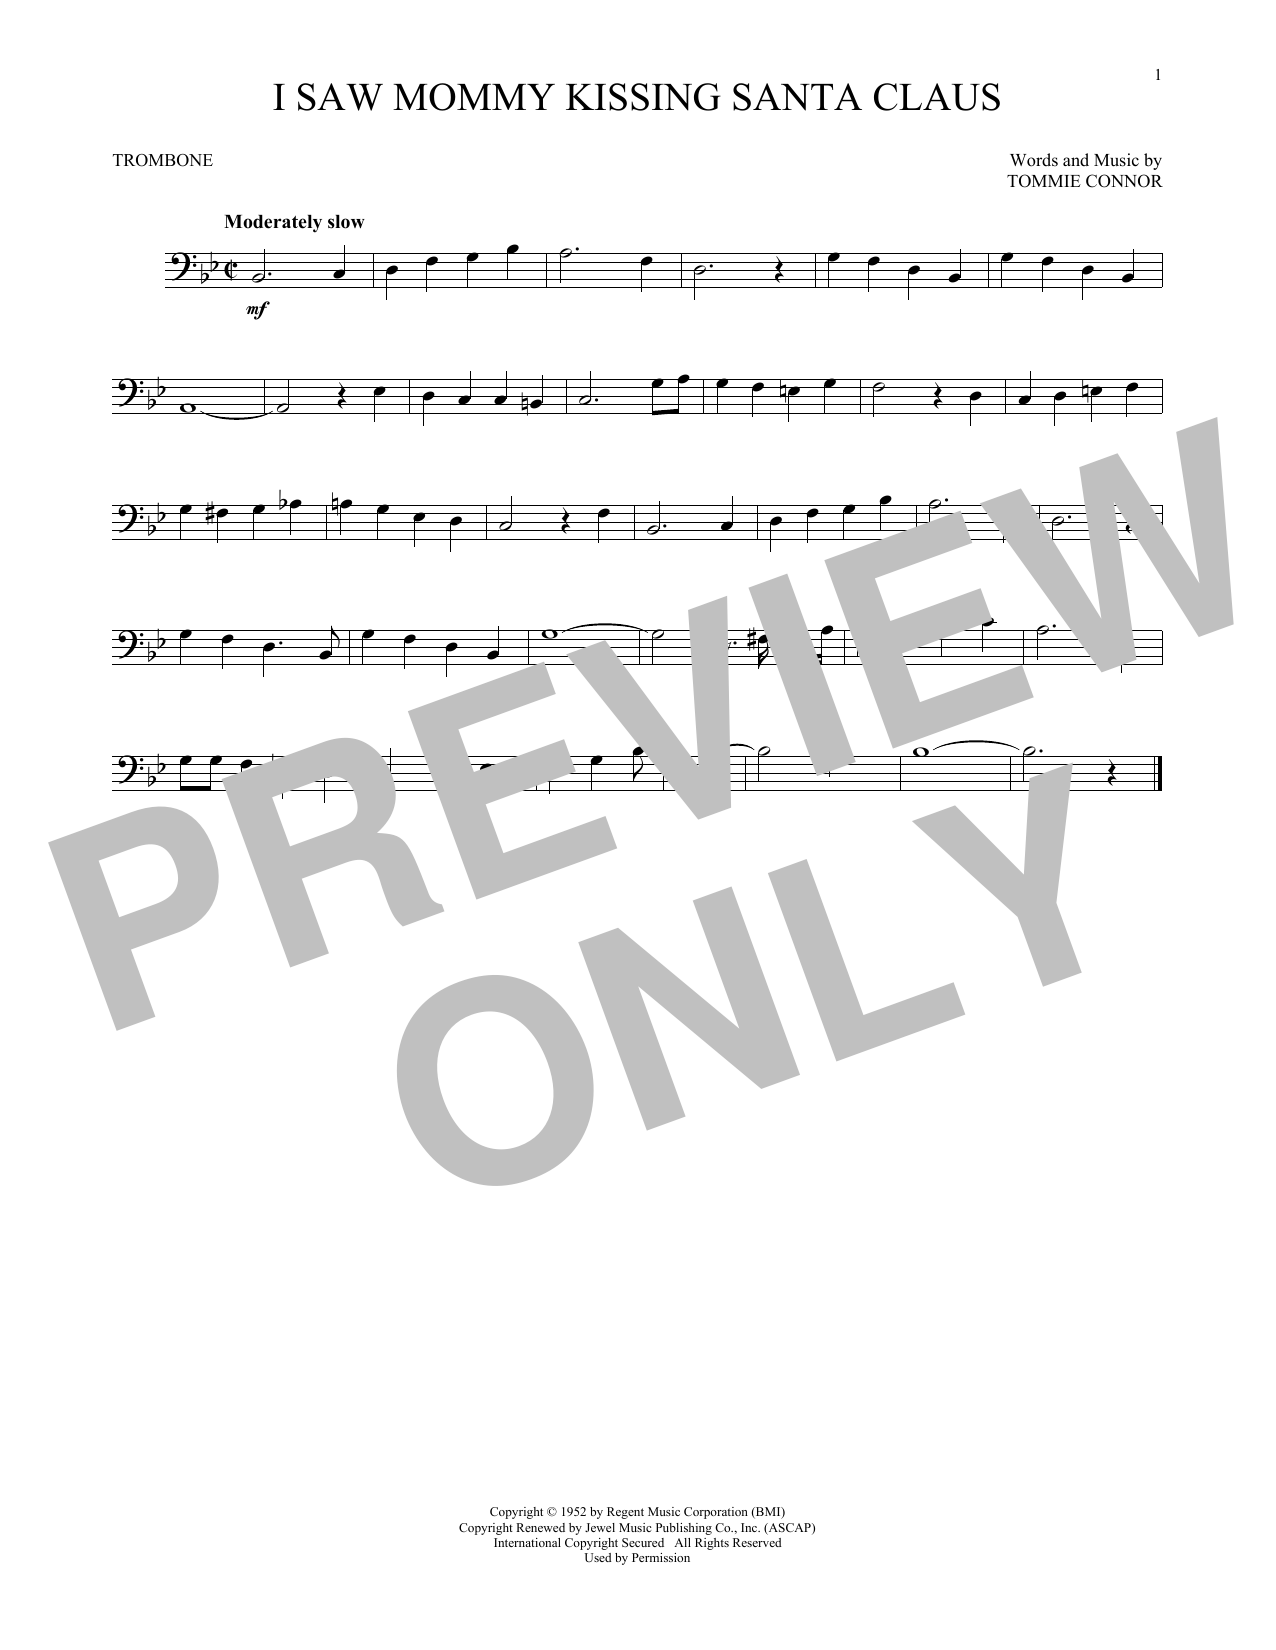 Download Tommie Connor I Saw Mommy Kissing Santa Claus Sheet Music